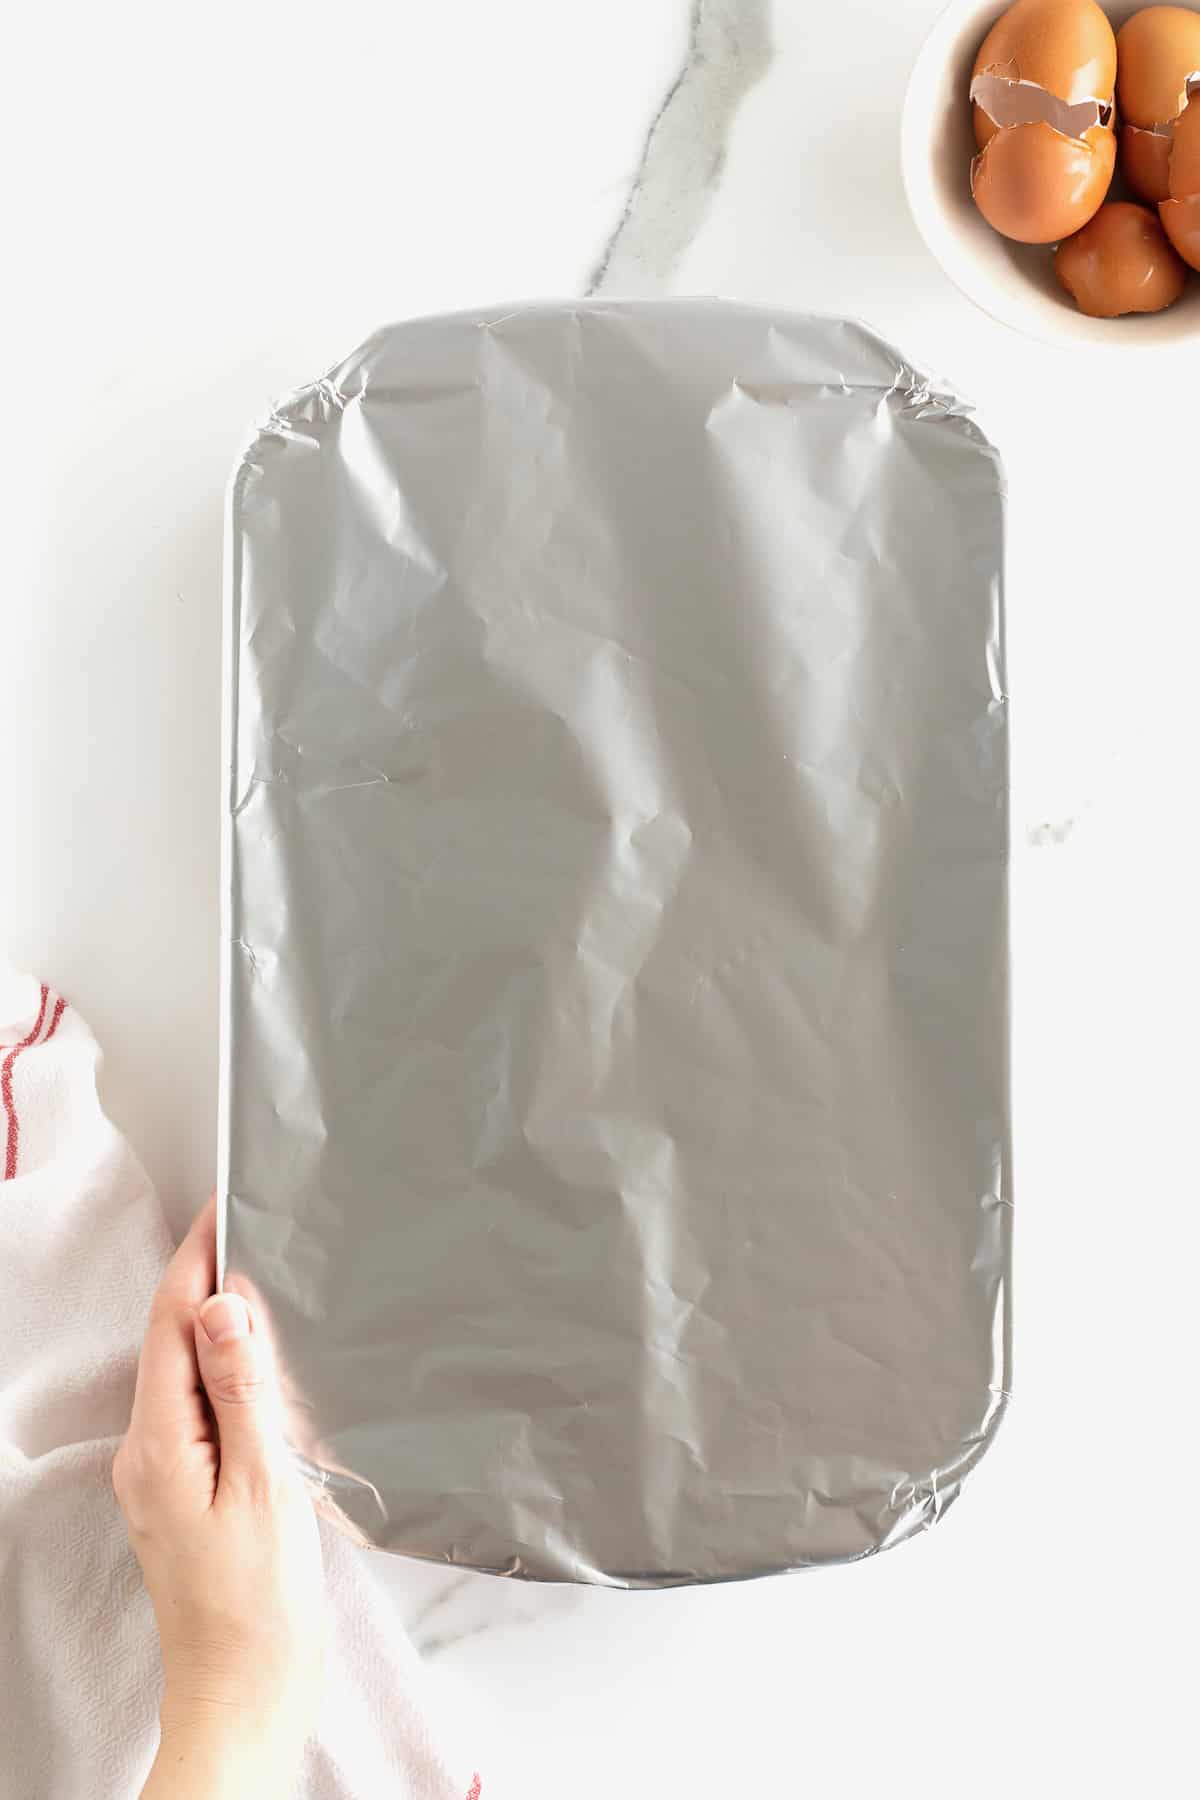 Cover the baking dish with aluminum foil and bake for 30 minutes. 